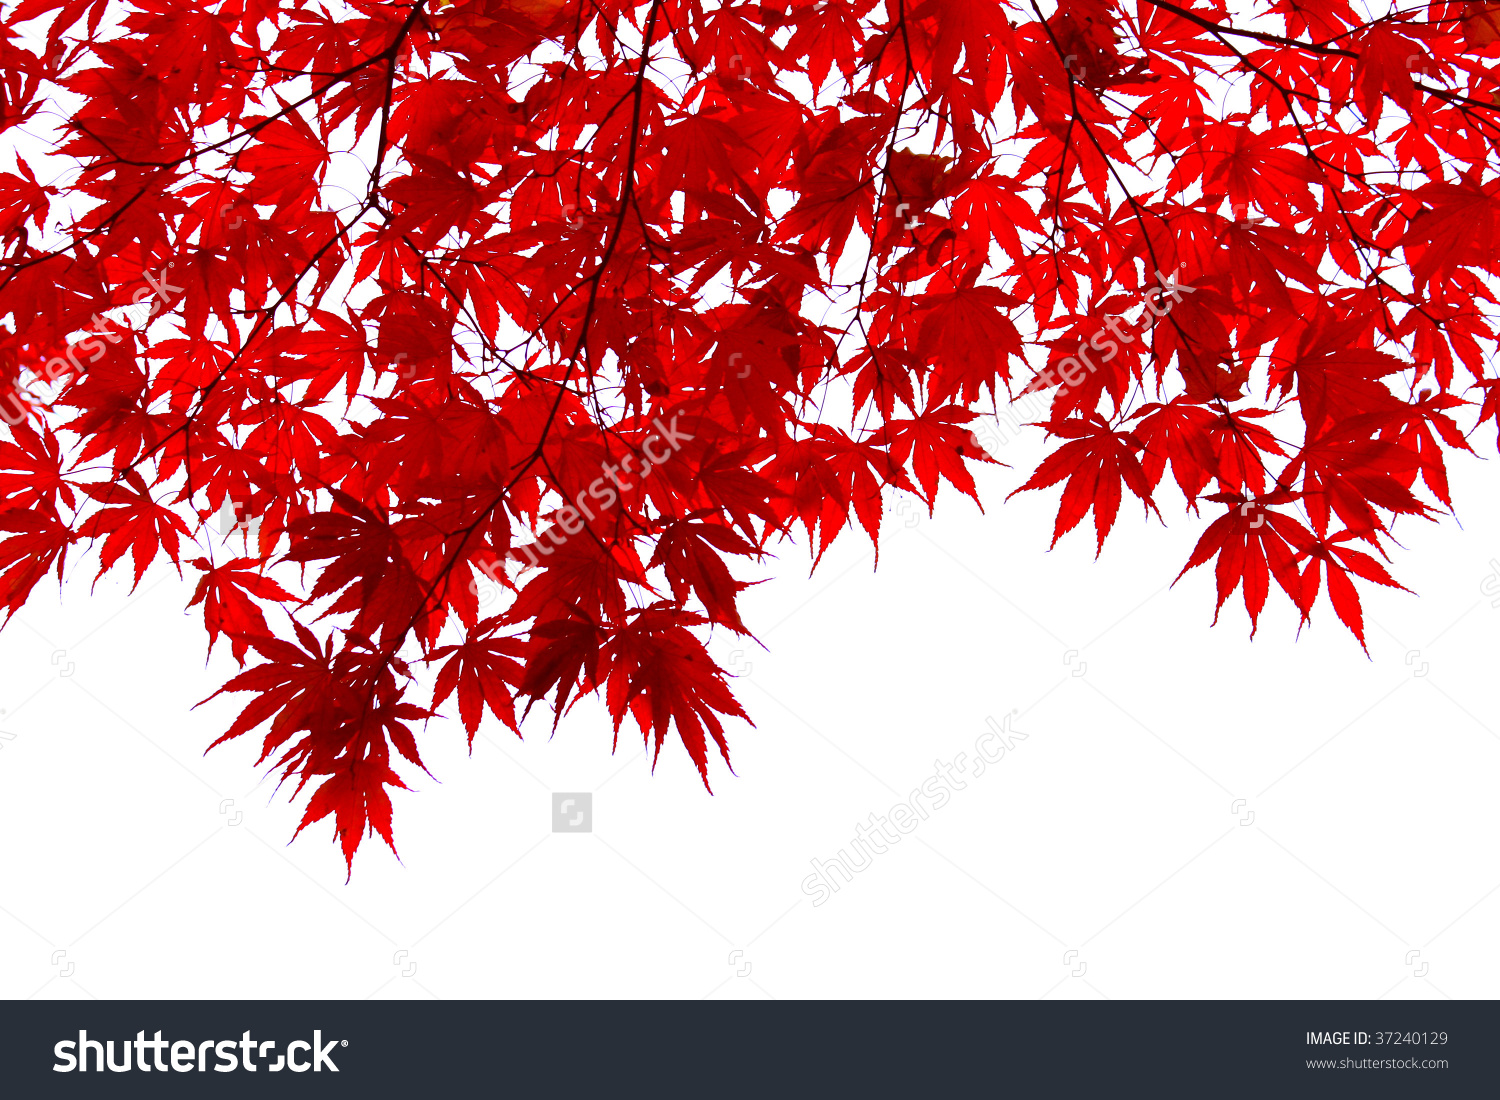 Red Japanese Maple Leaves Stock Photo 37240129.